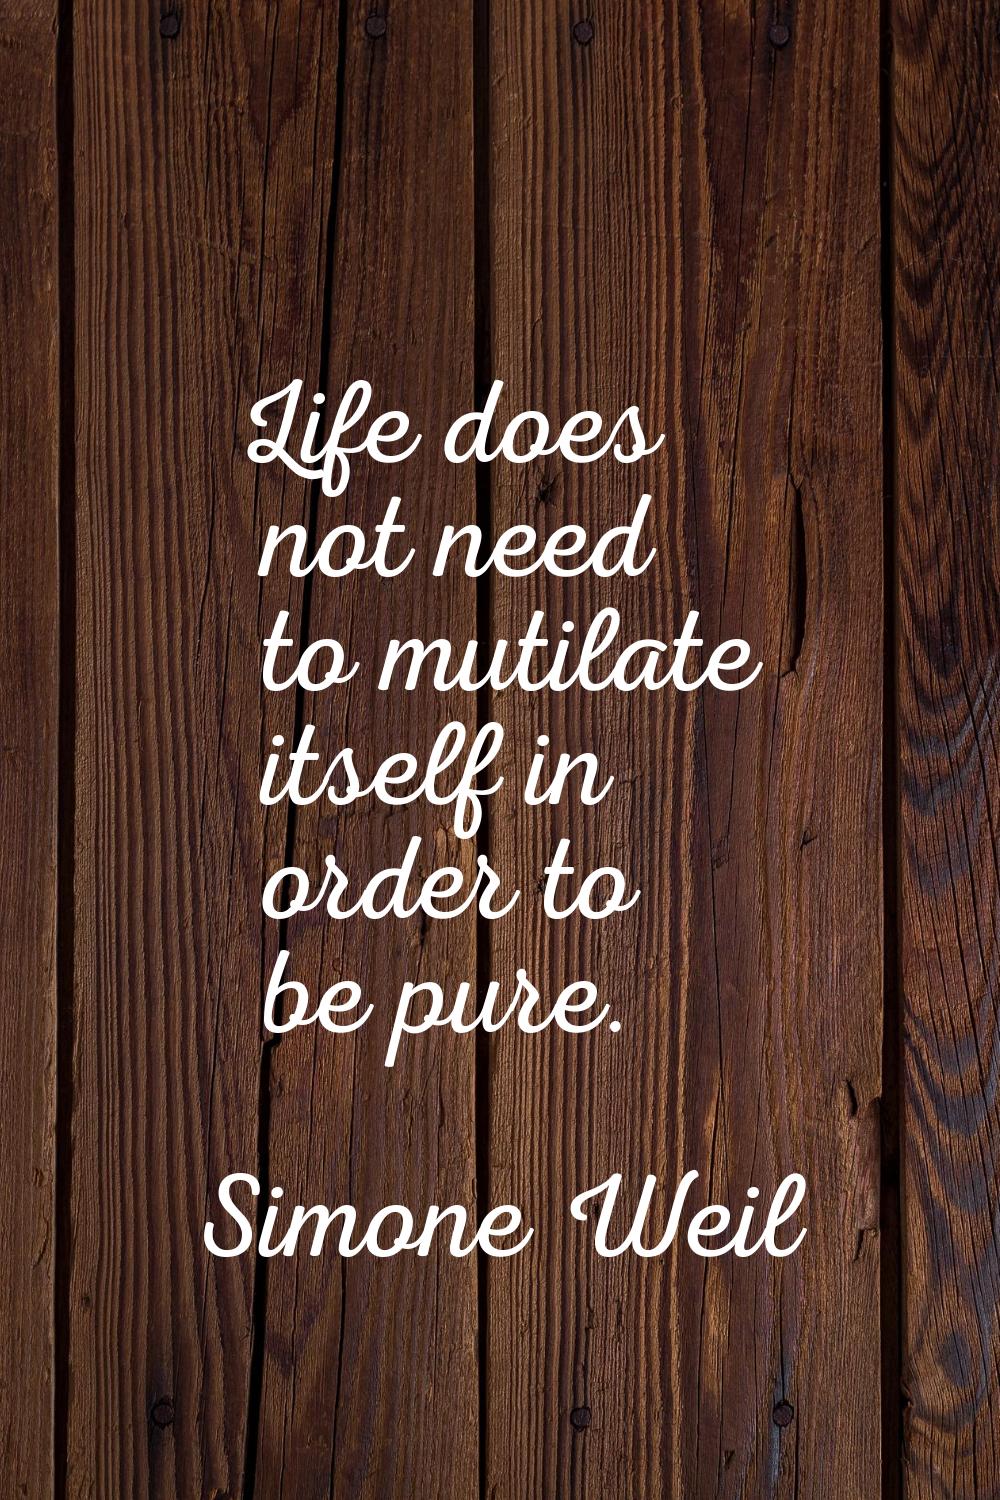 Life does not need to mutilate itself in order to be pure.